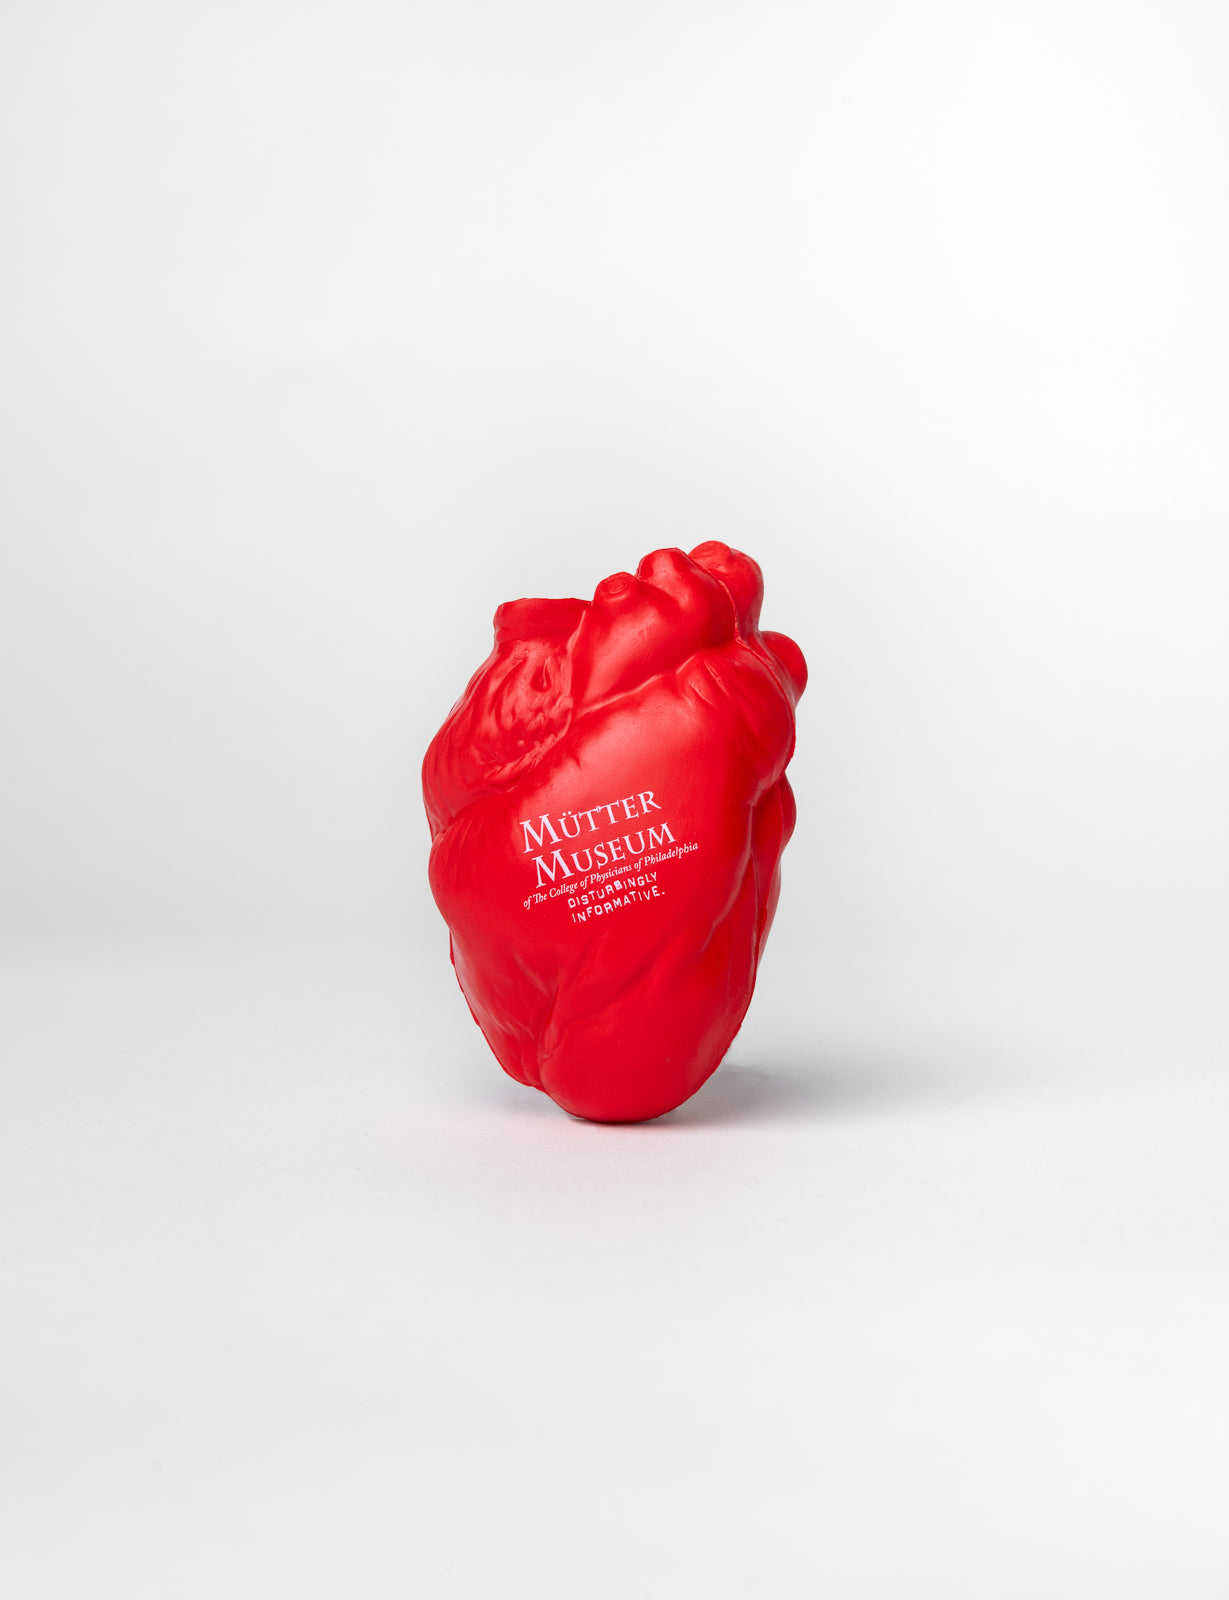 A red foam squeeze toy in the shape of a heart with the Mütter Museum logo in white imprinted on it.